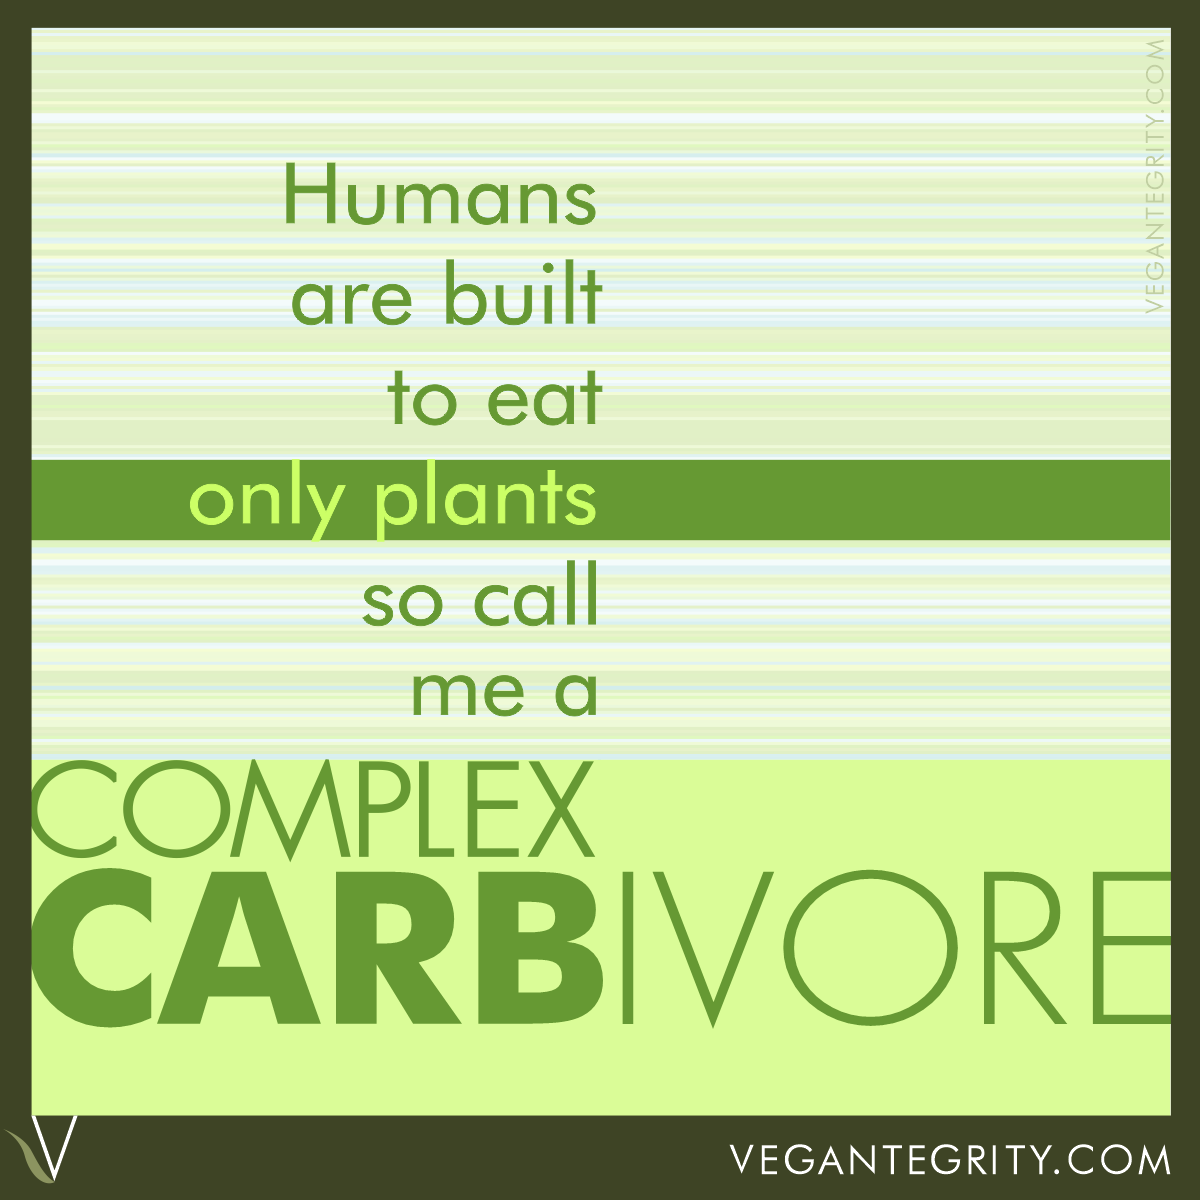 Humans are built to eat only plants so call me a complex CARBivore.